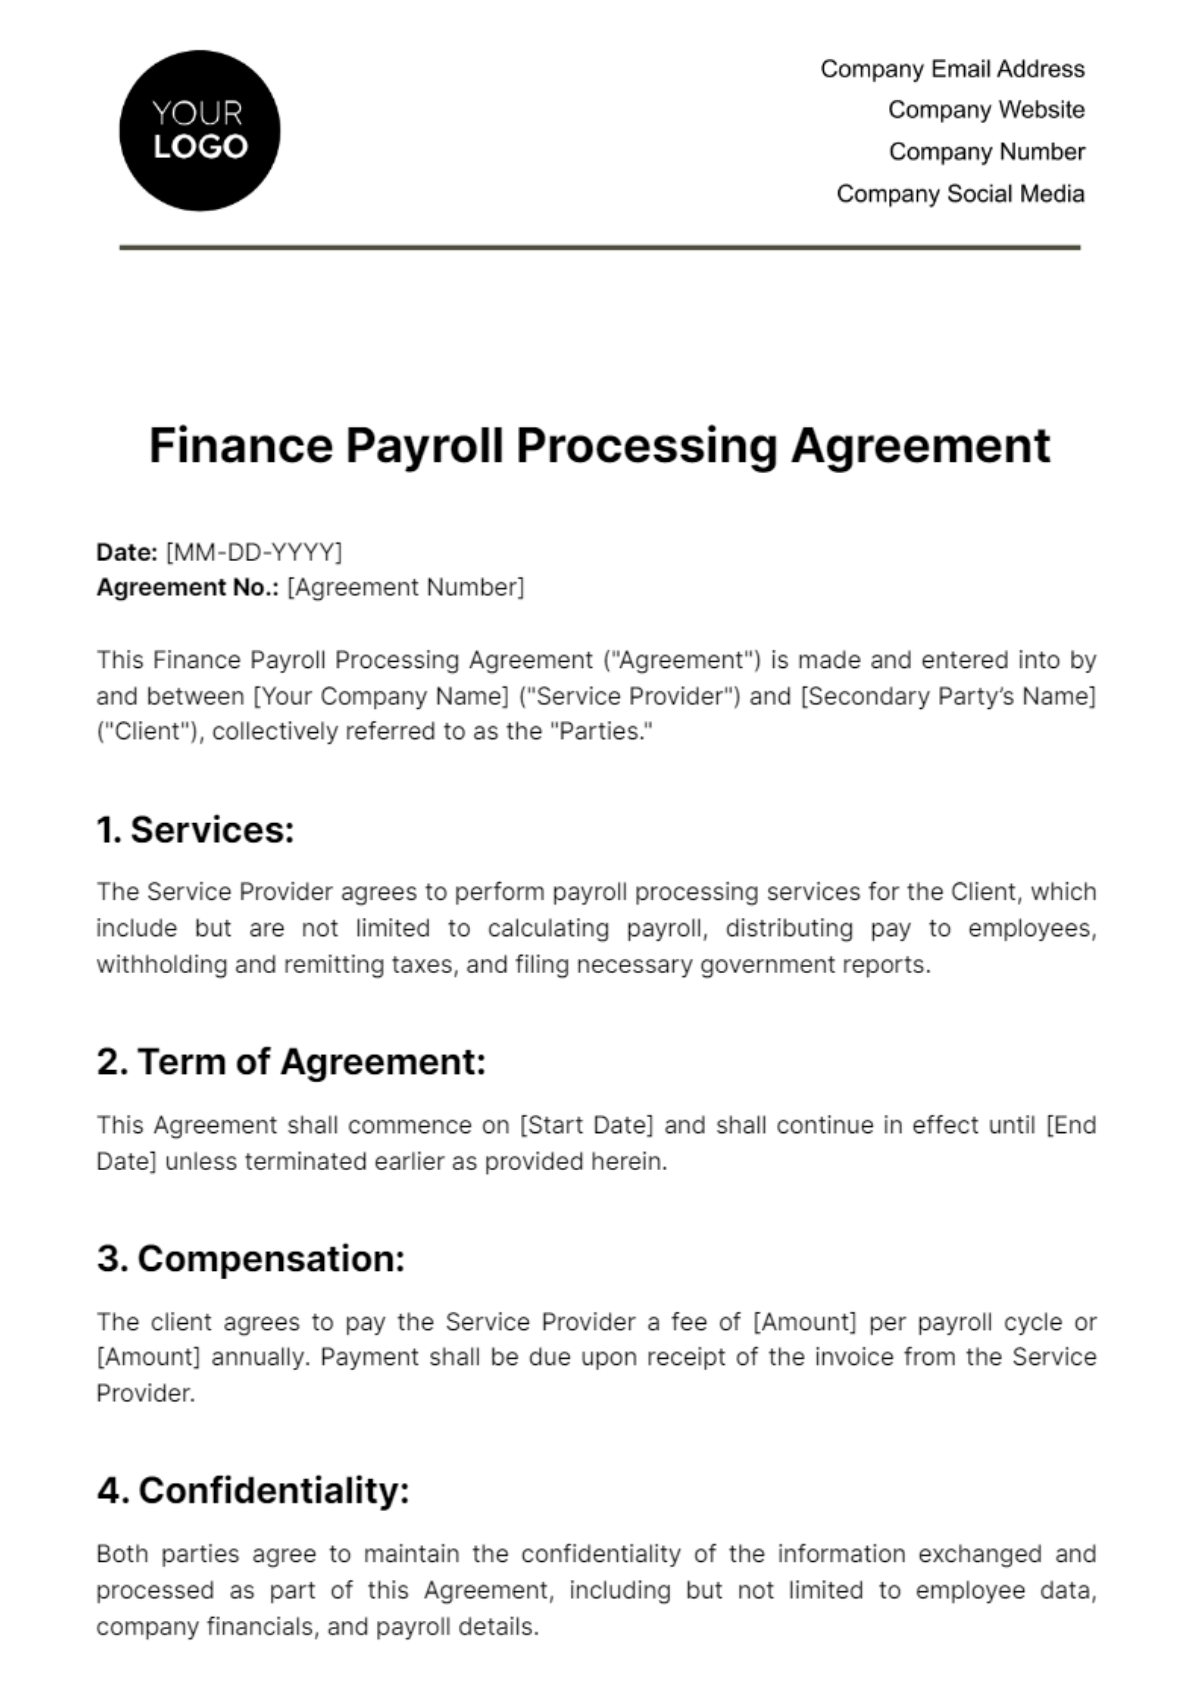 Free Finance Payroll Processing Agreement Template